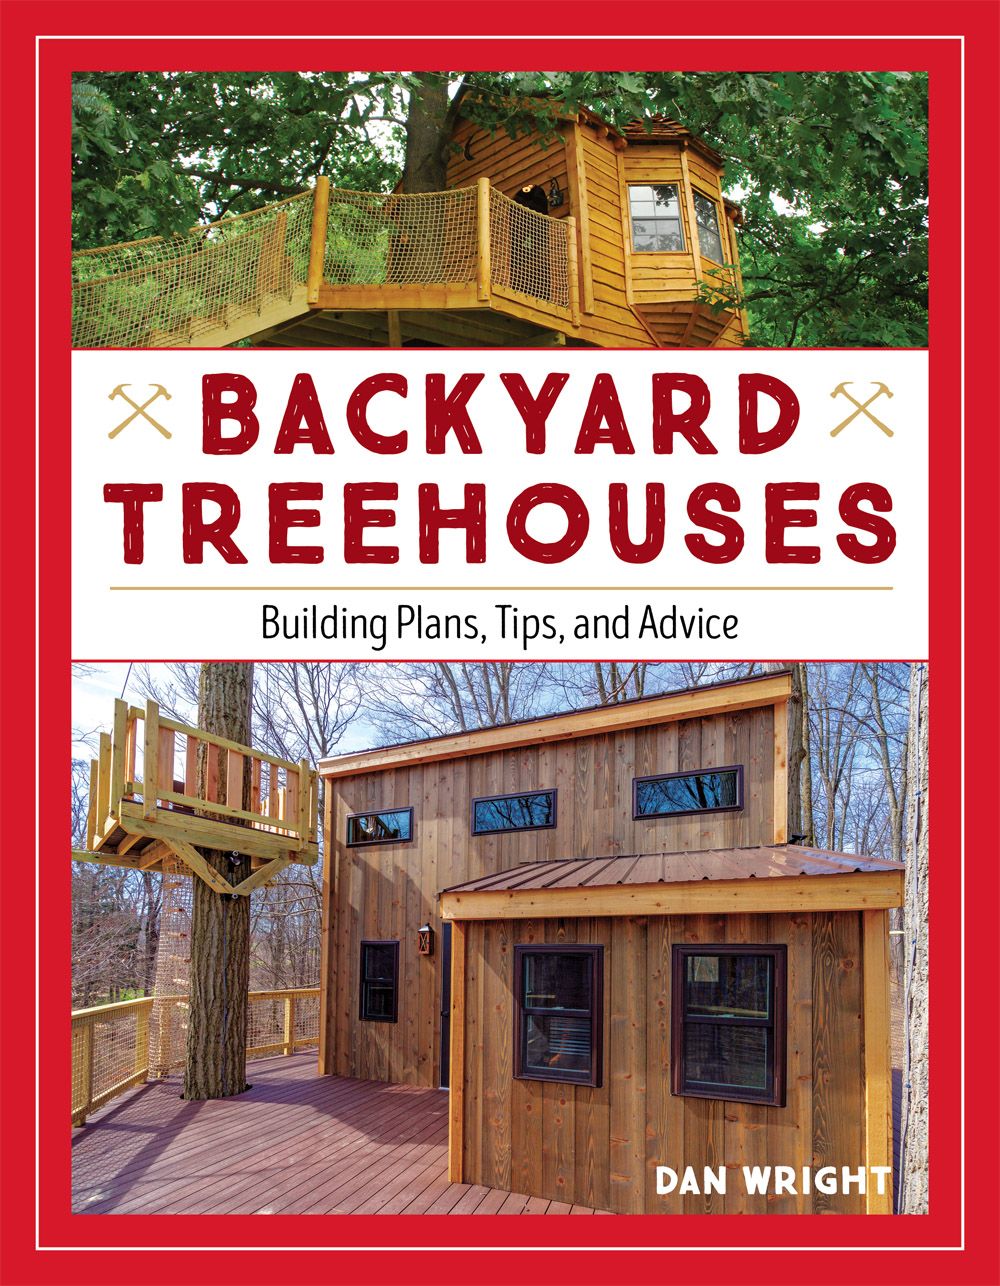 Backyard Treehouses Building Plans Tips and Advice - image 2